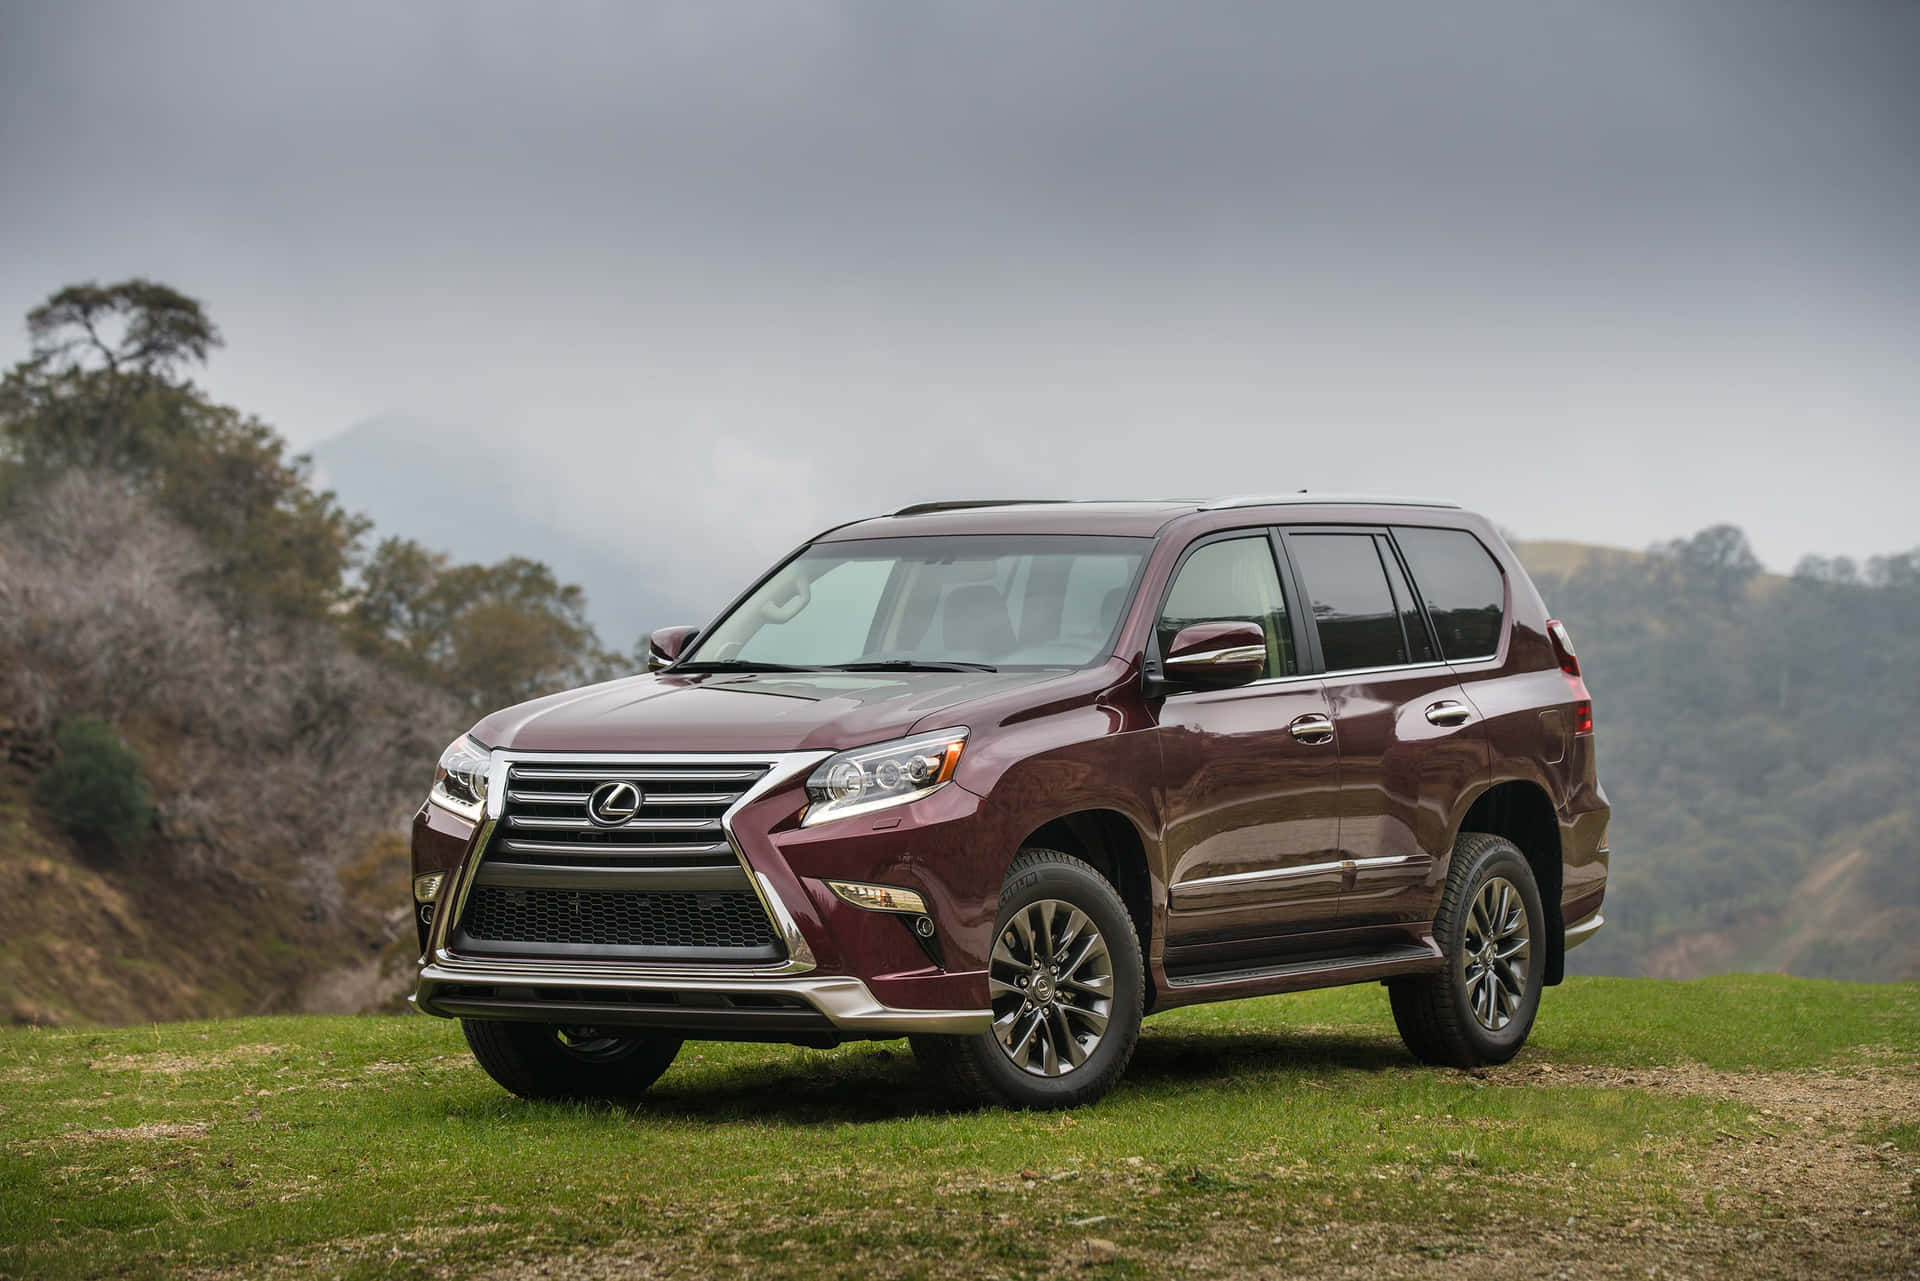 A Lexus GX 460 conquers off-road terrain with style and luxury Wallpaper